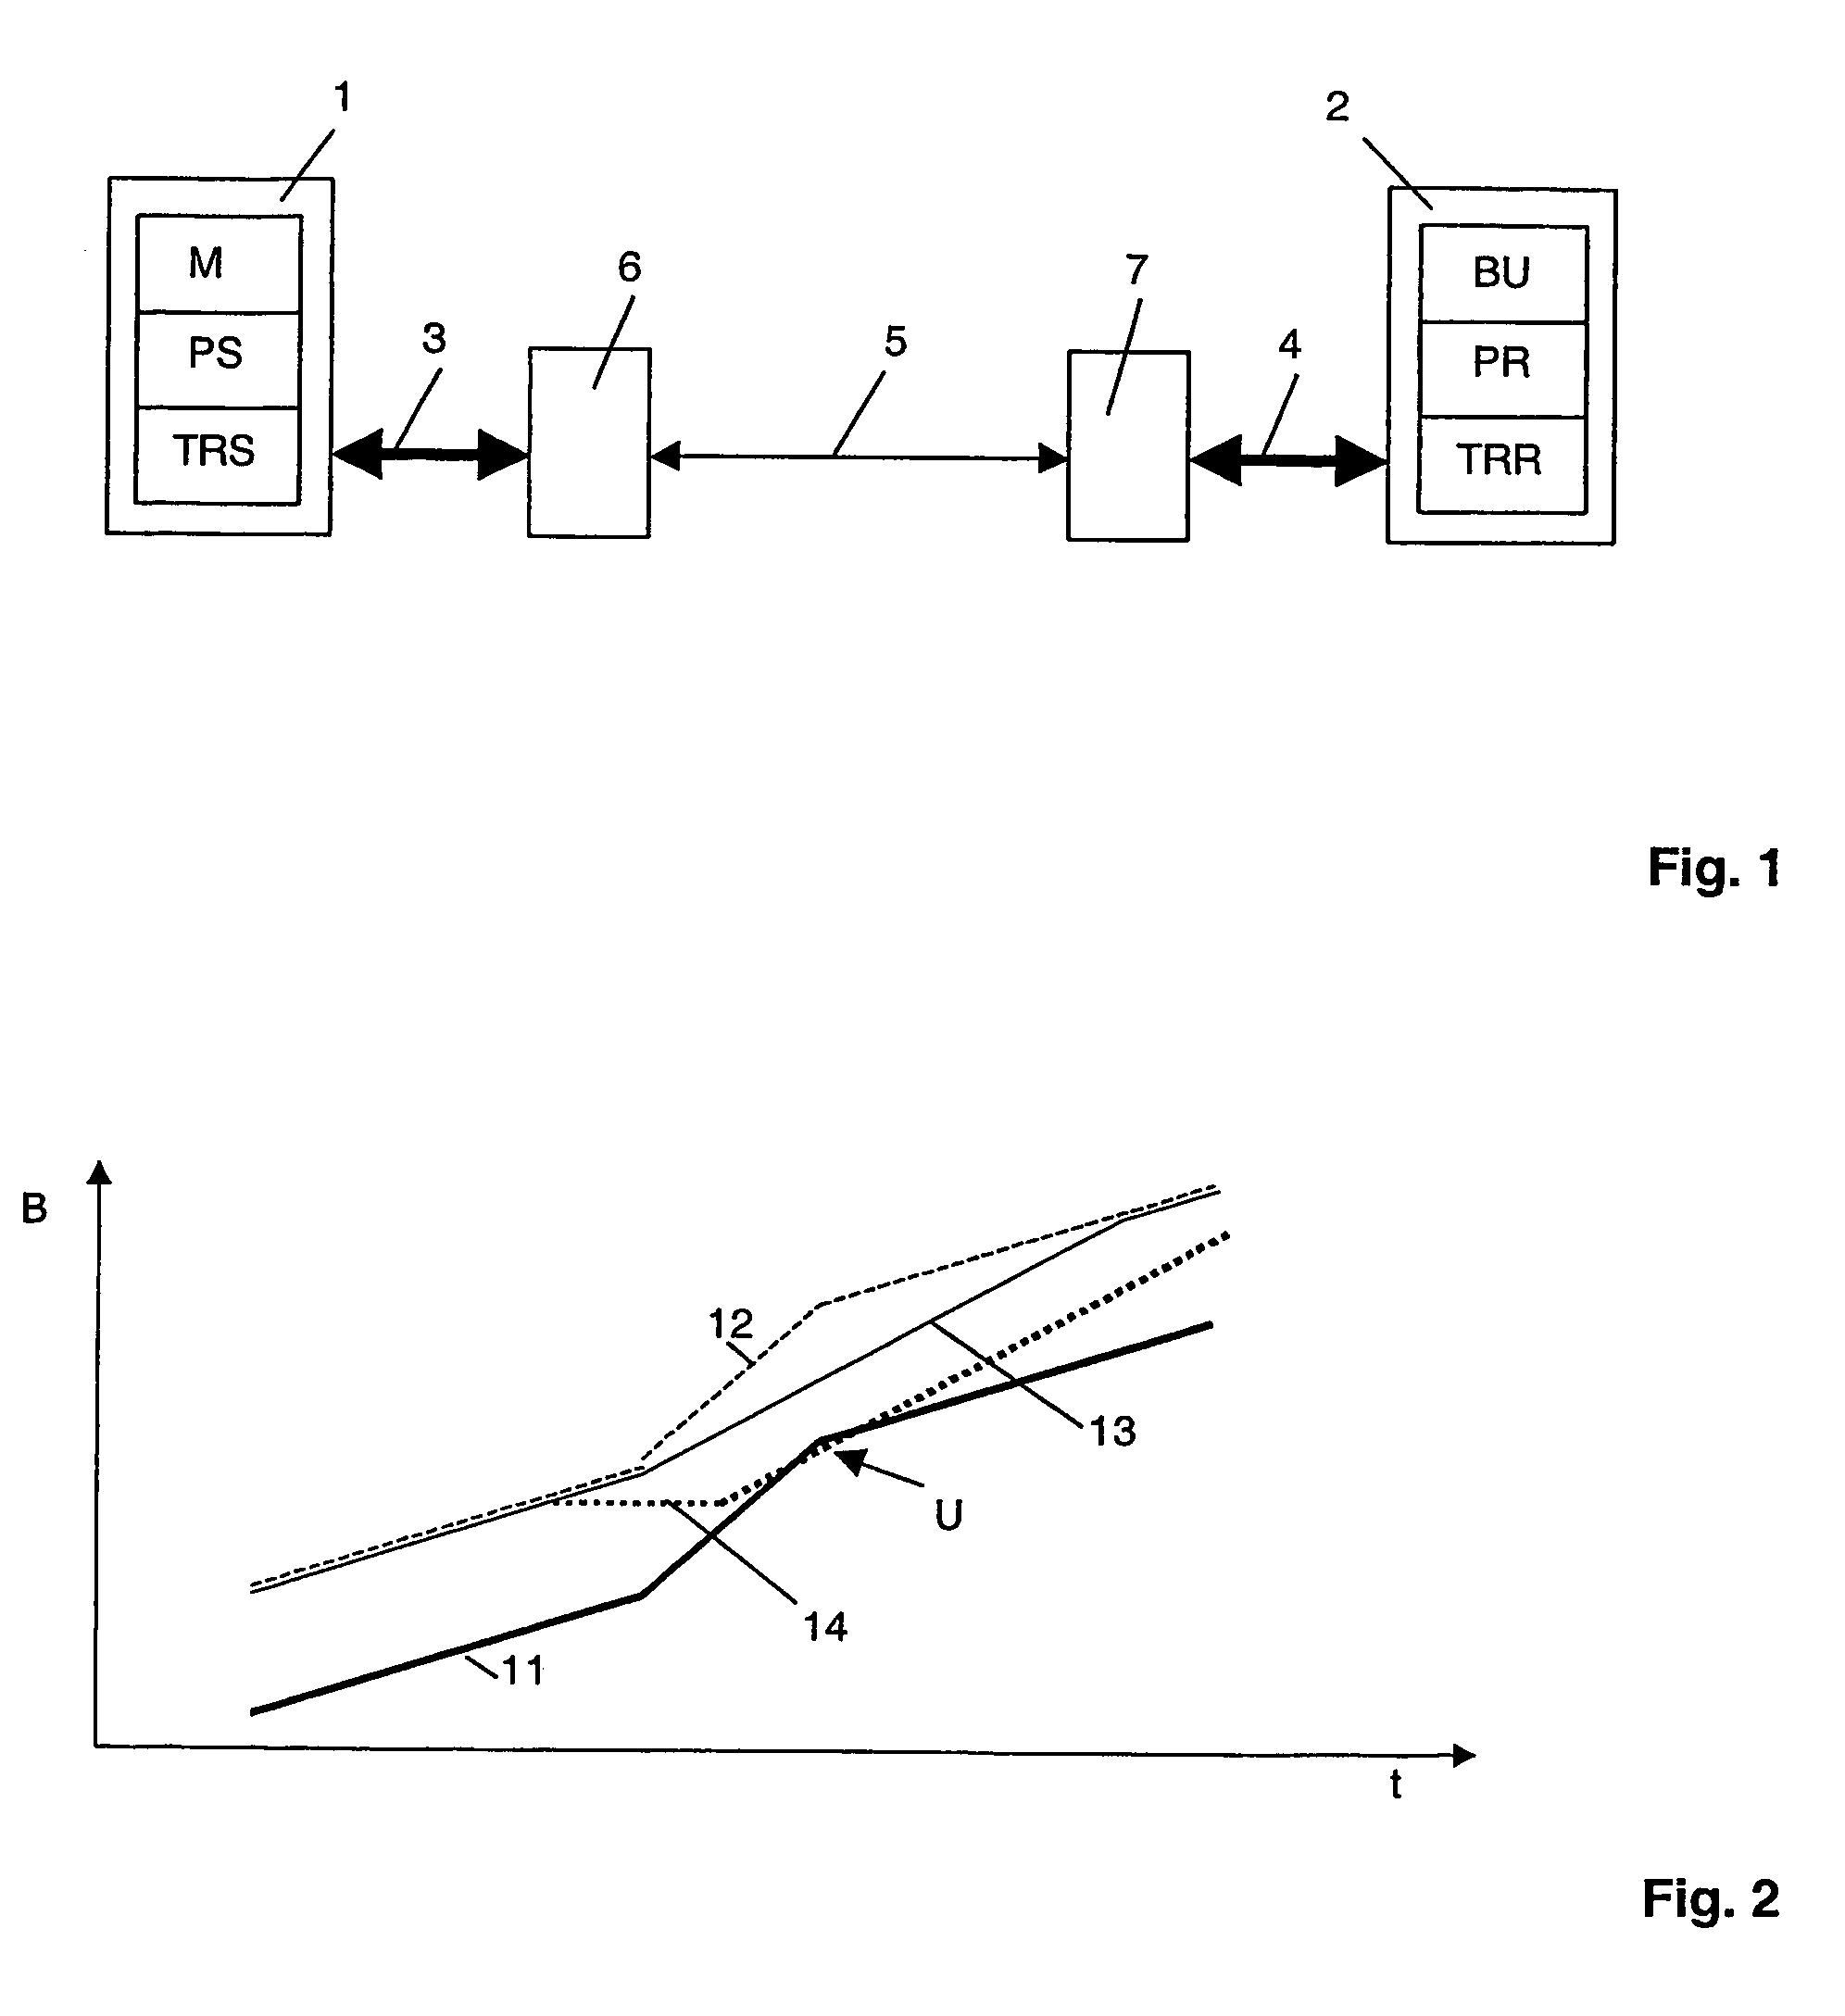 Method and devices for controlling retransmissions in data streaming